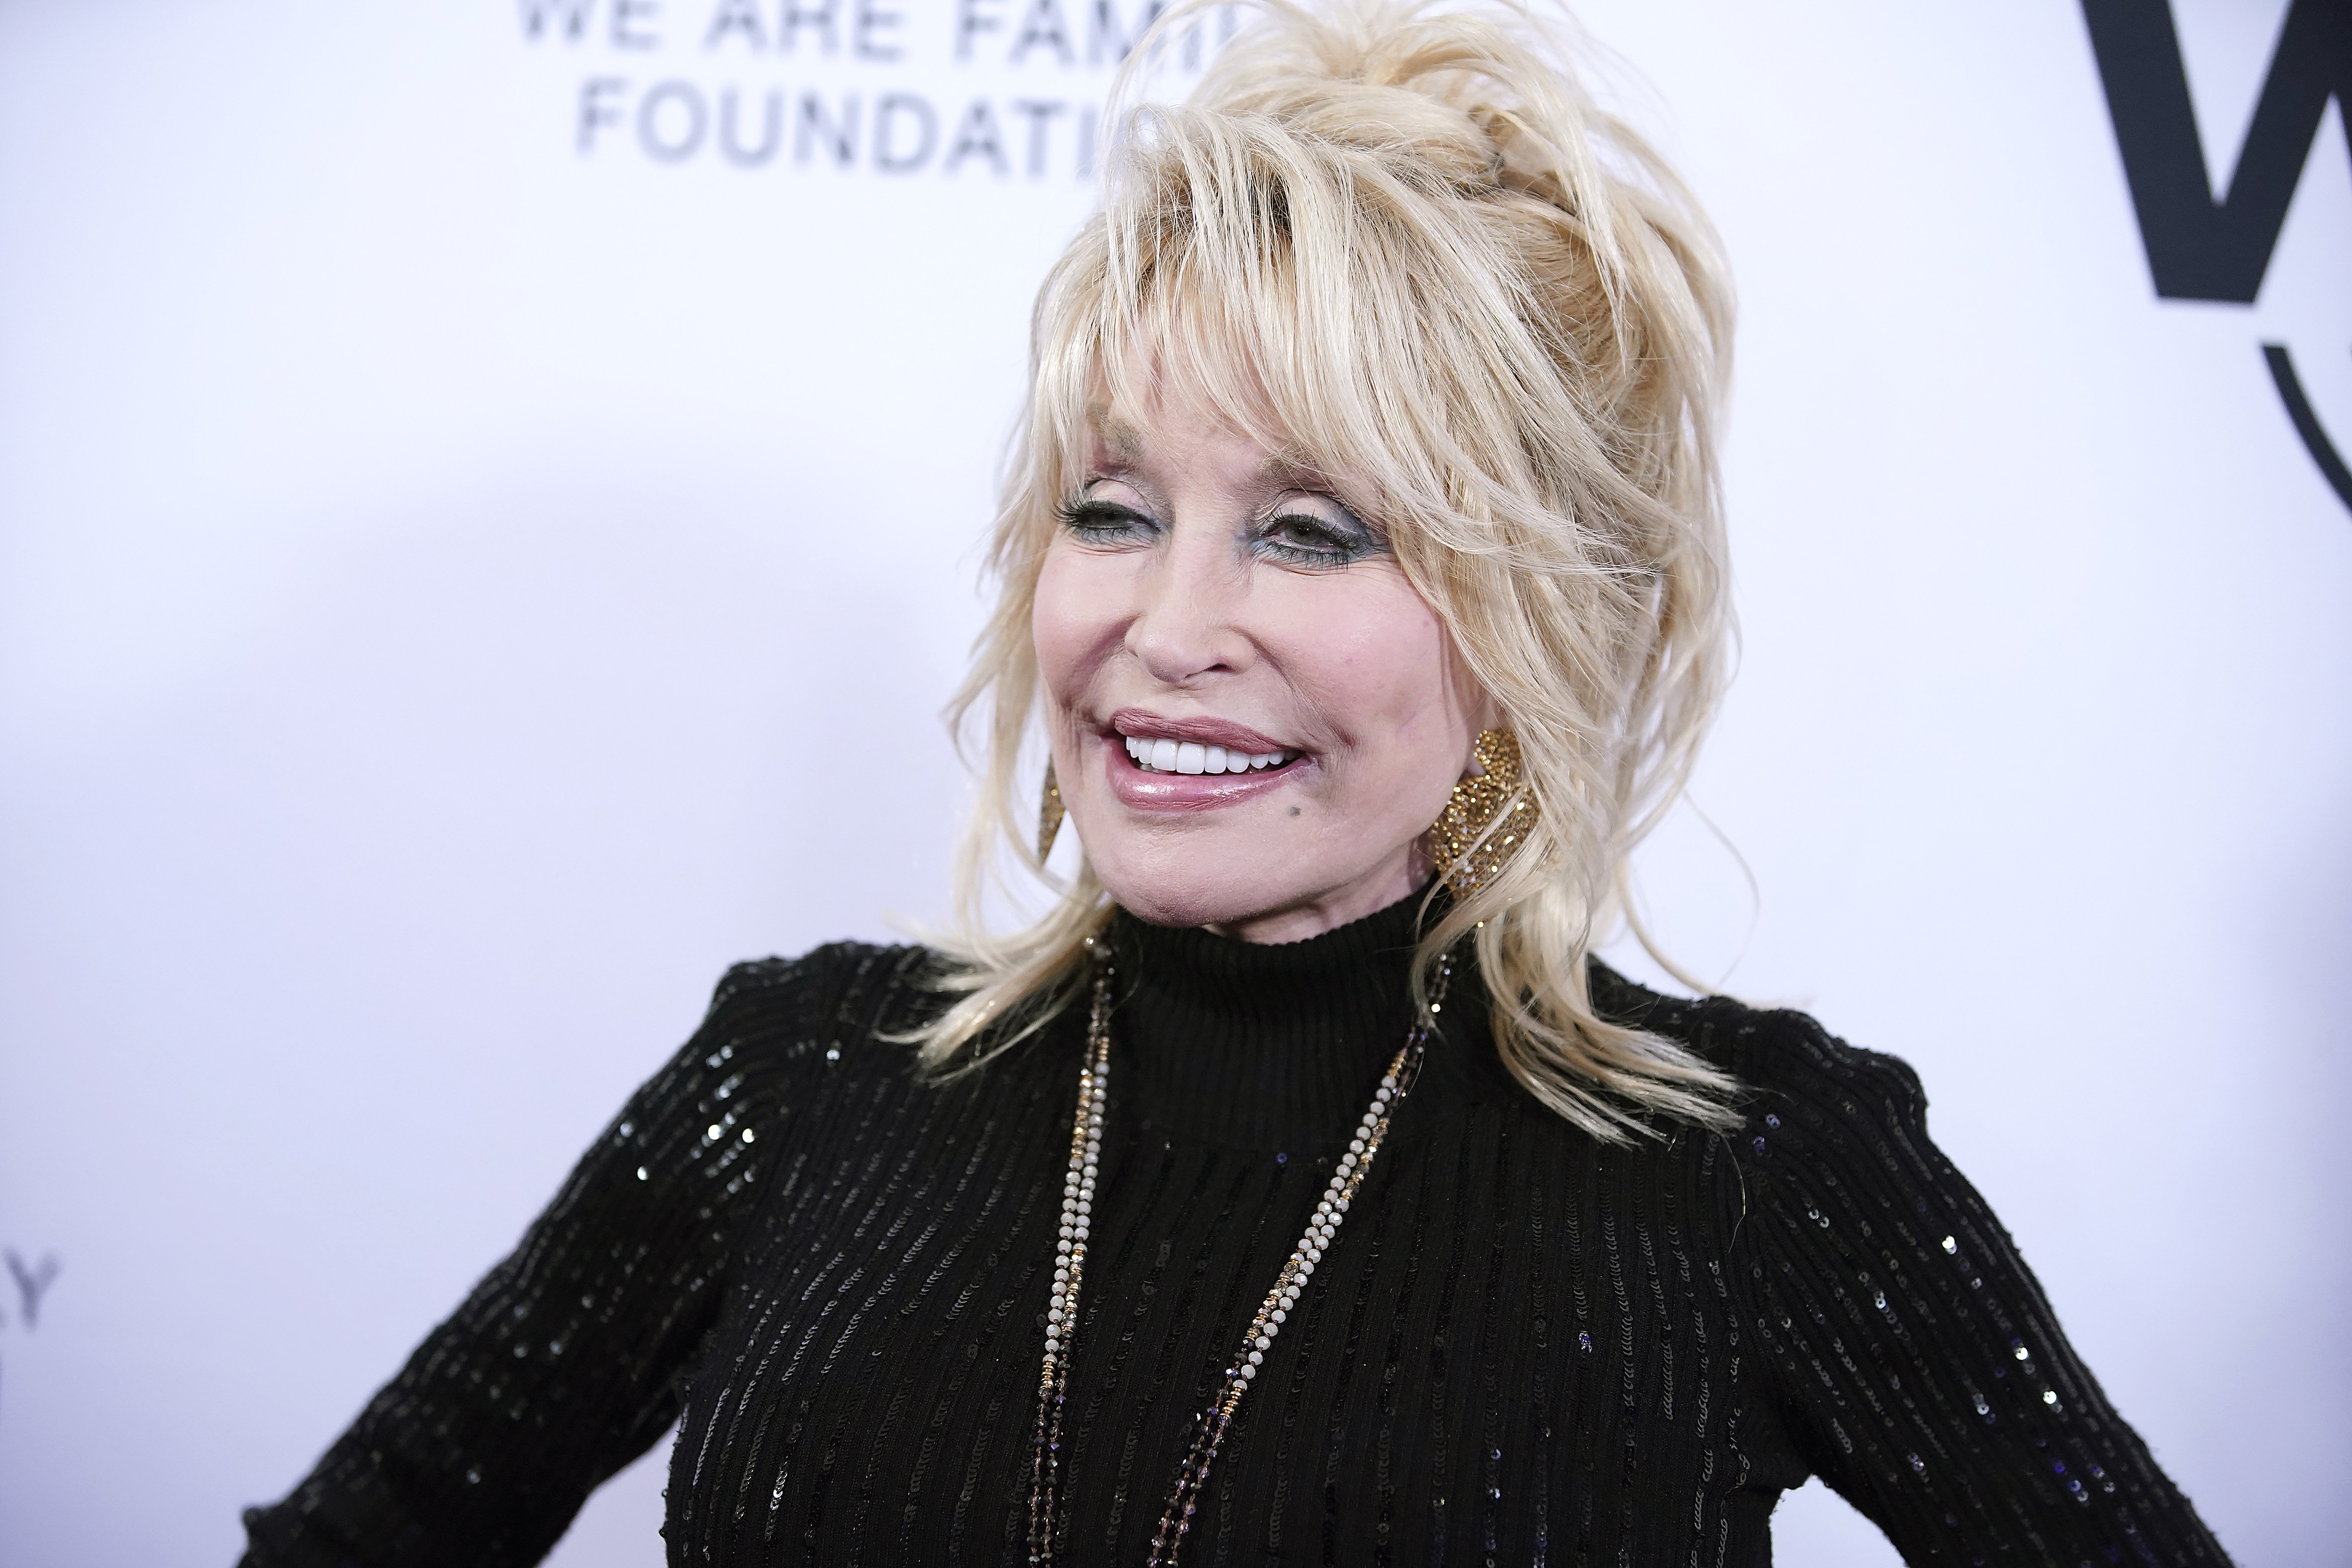 Dolly Parton attends We Are Family Foundation at Hammerstein Ballroom on November 5, 2019, in New York City. | Source: Getty Images